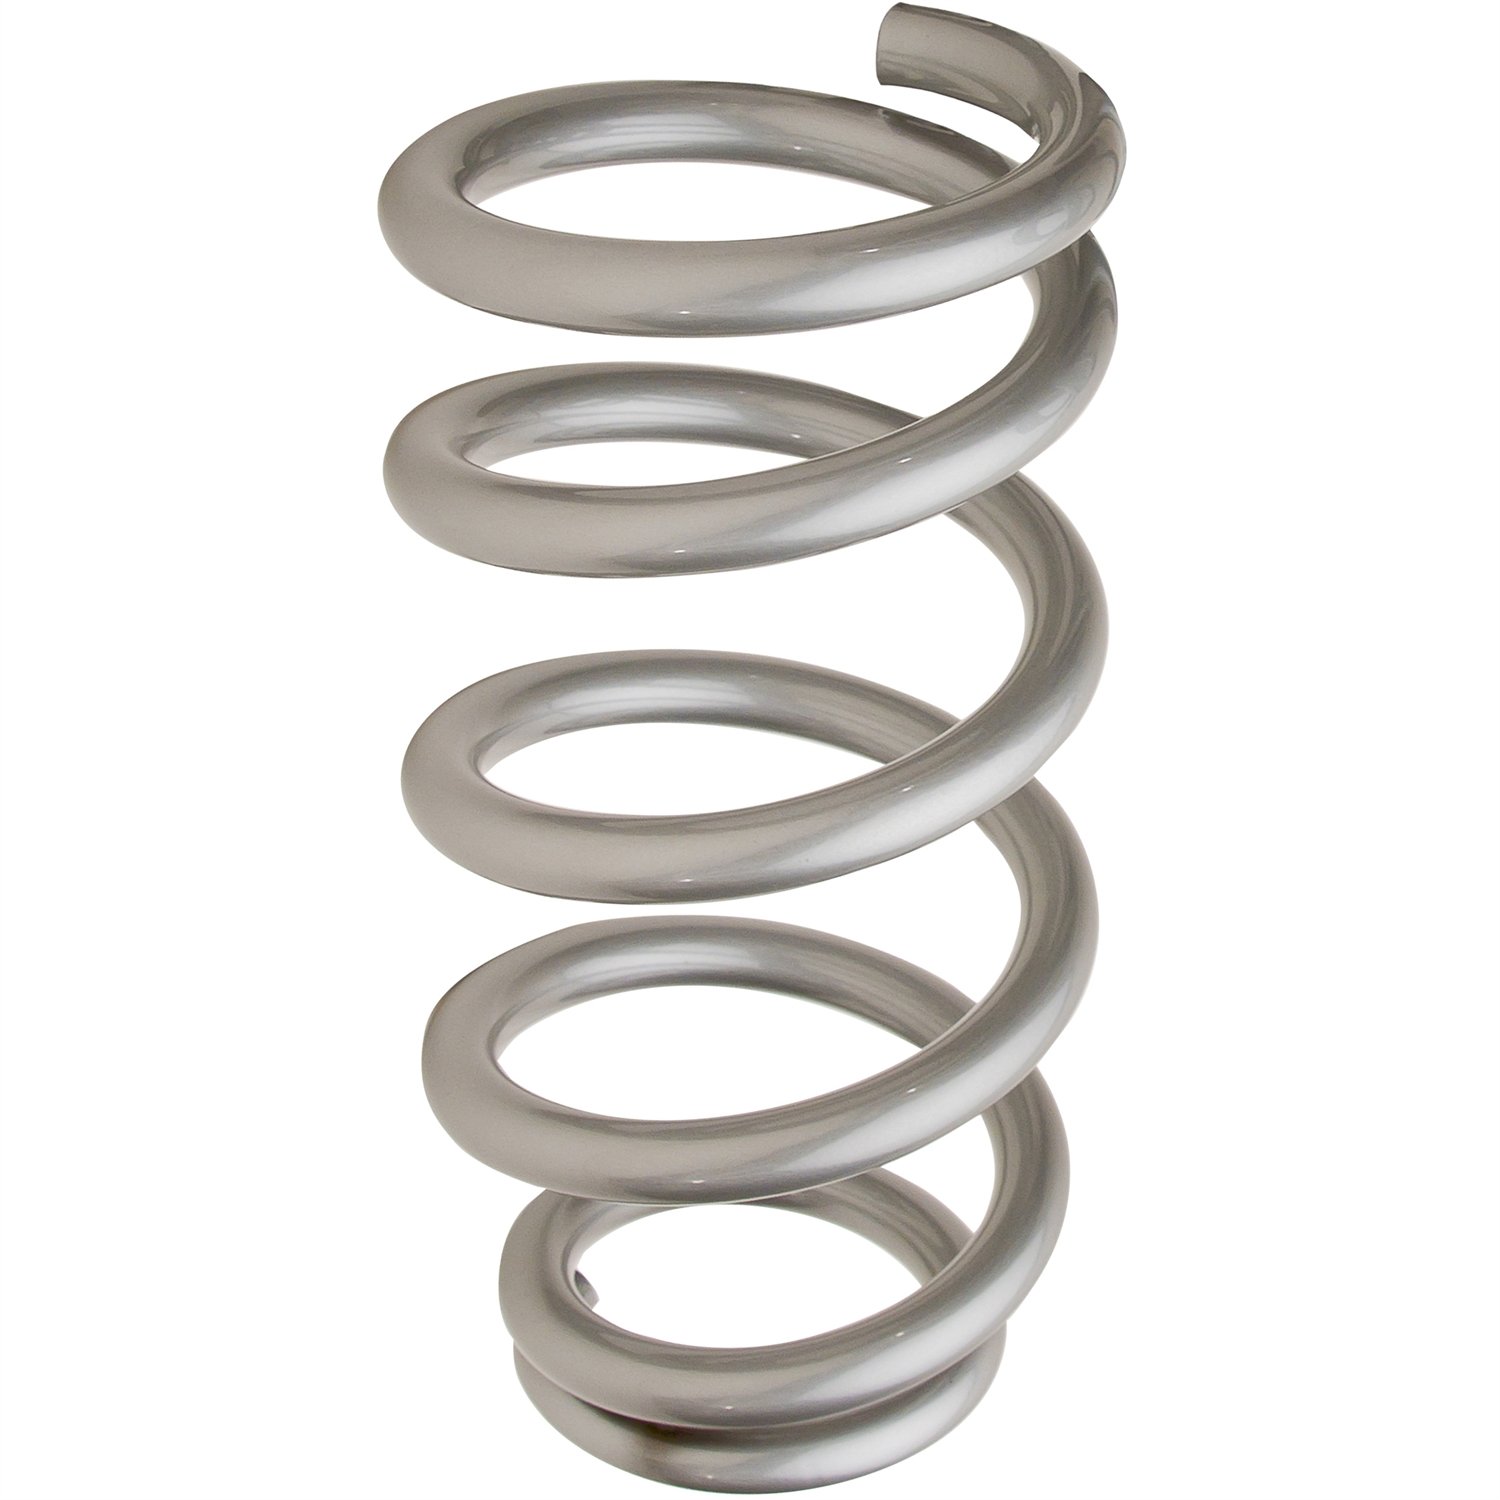 GM Style Flat & Ground Large High-Tensile Spring 10"